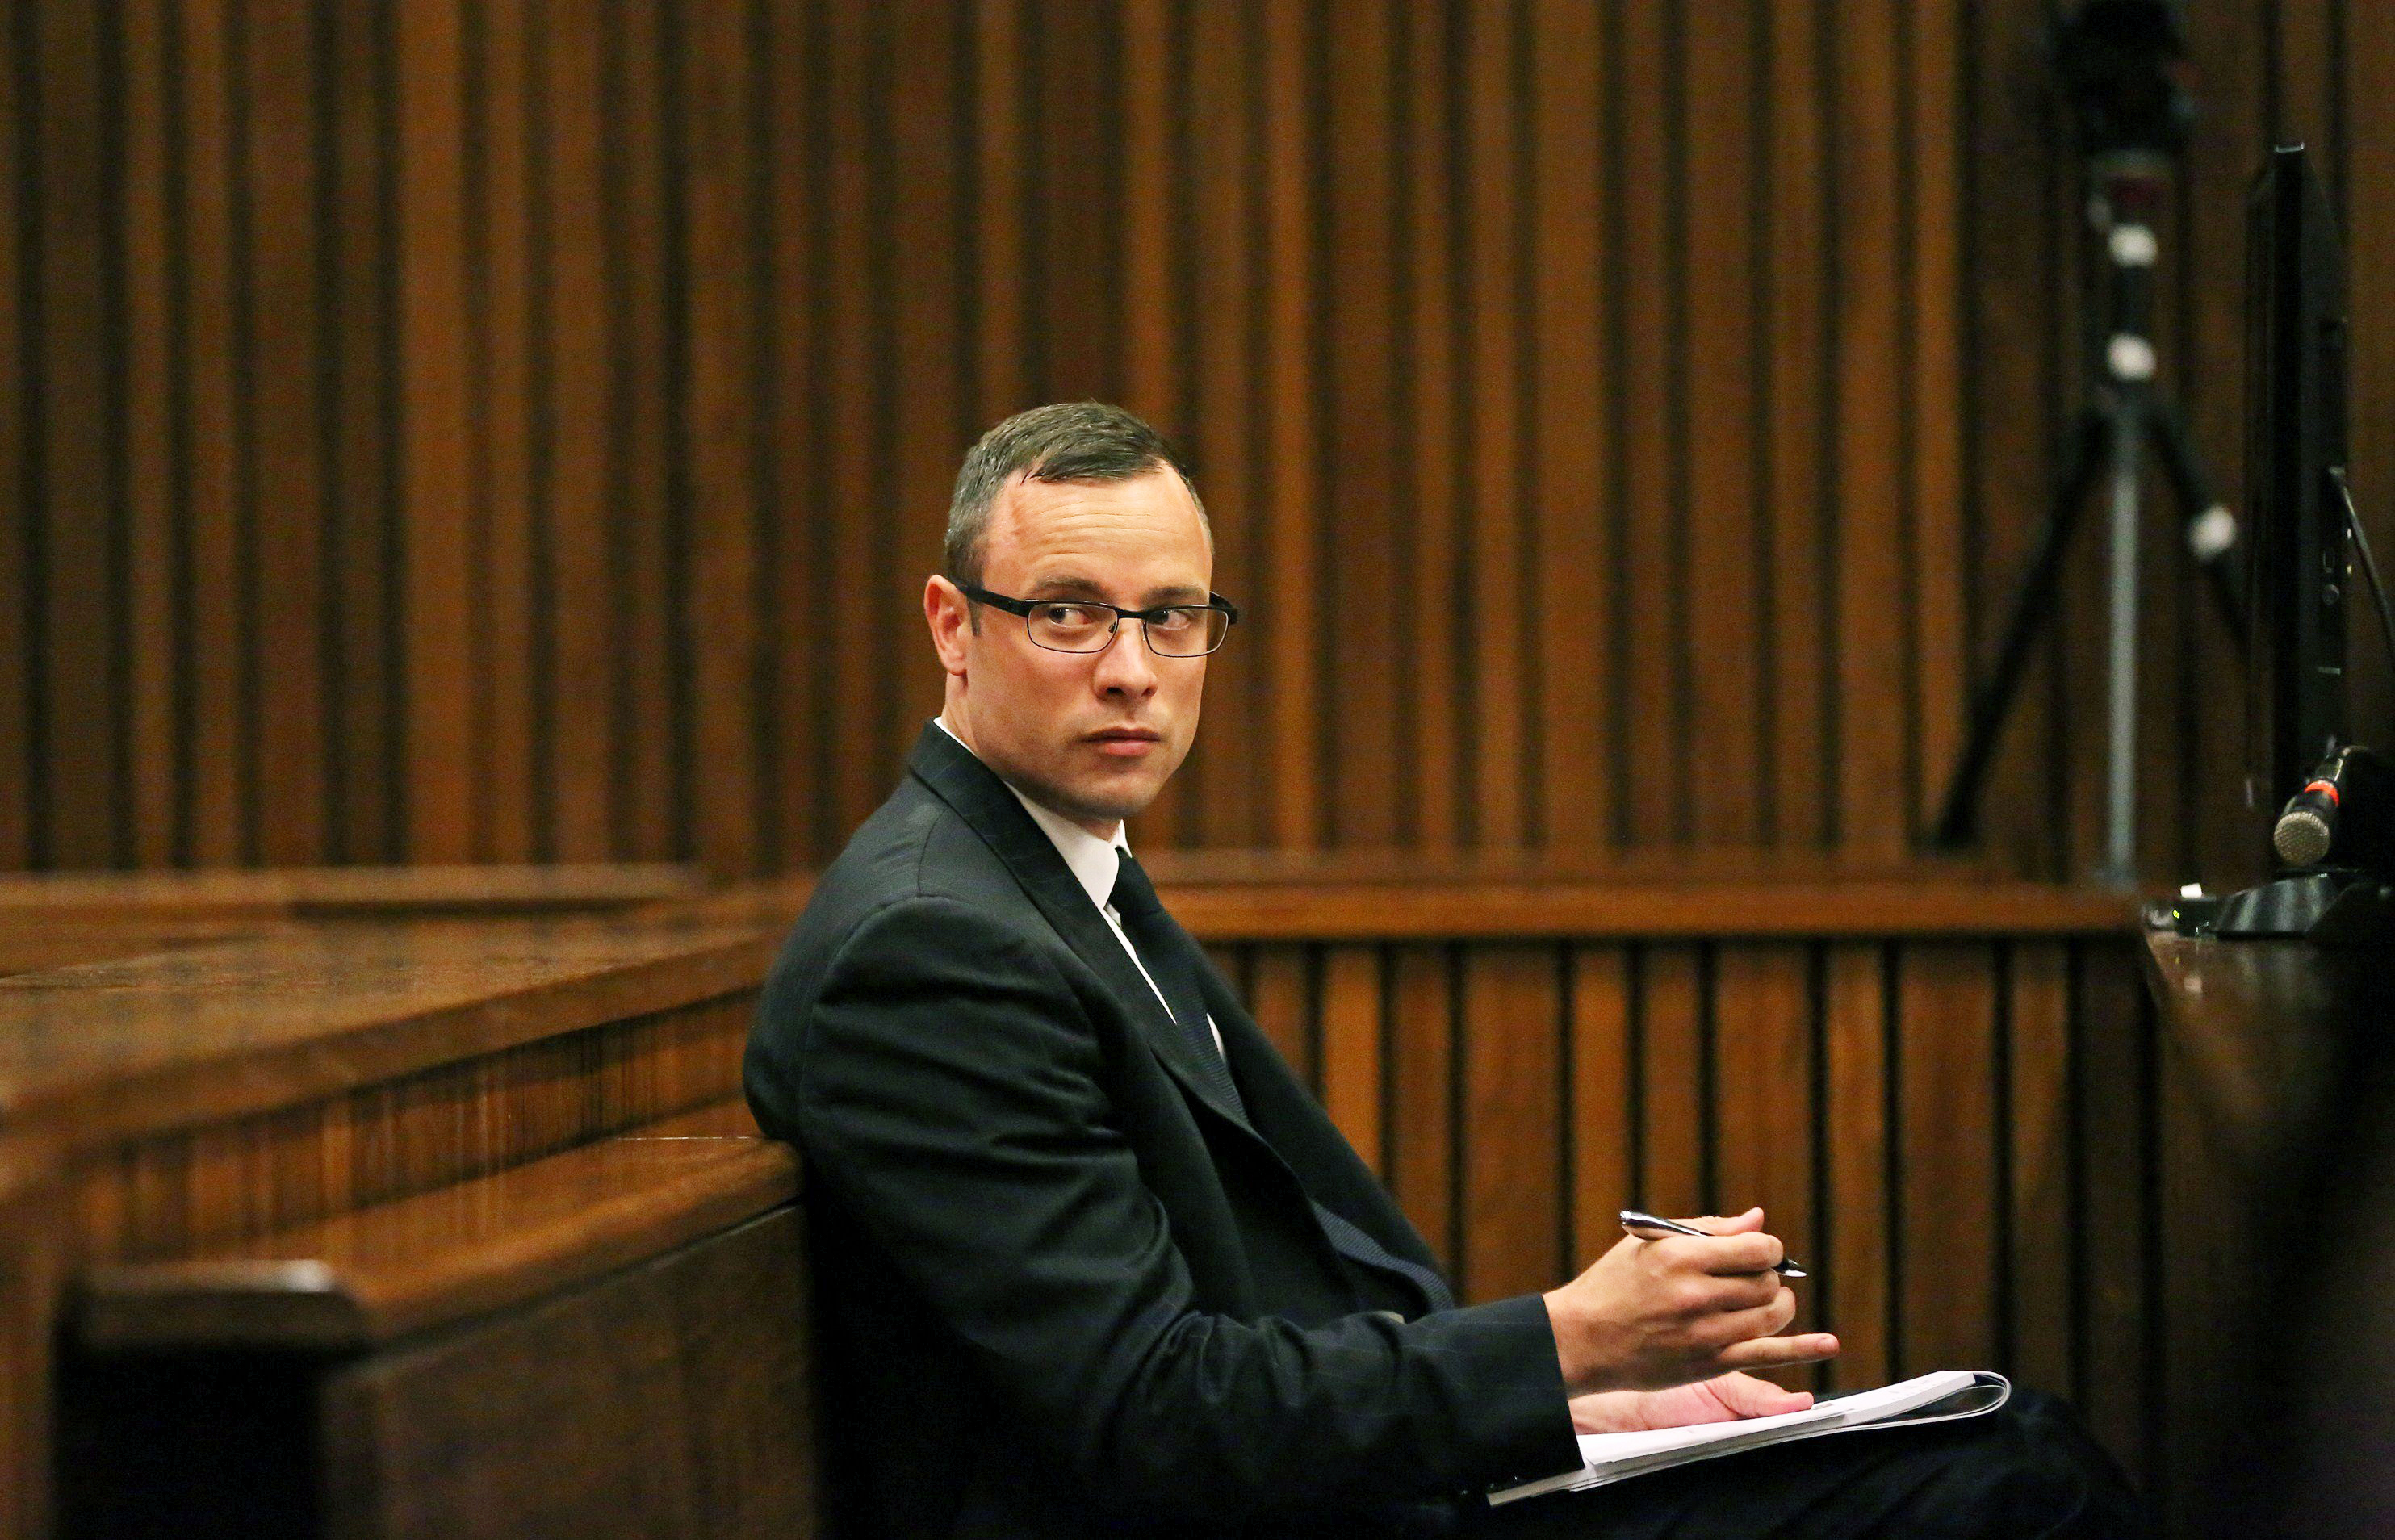 Paralympic track star Oscar Pistorius sits in the dock during his trial for the murder of his girlfriend Reeva Steenkamp, at the North Gauteng High Court in Pretoria, on March 25, 2014.